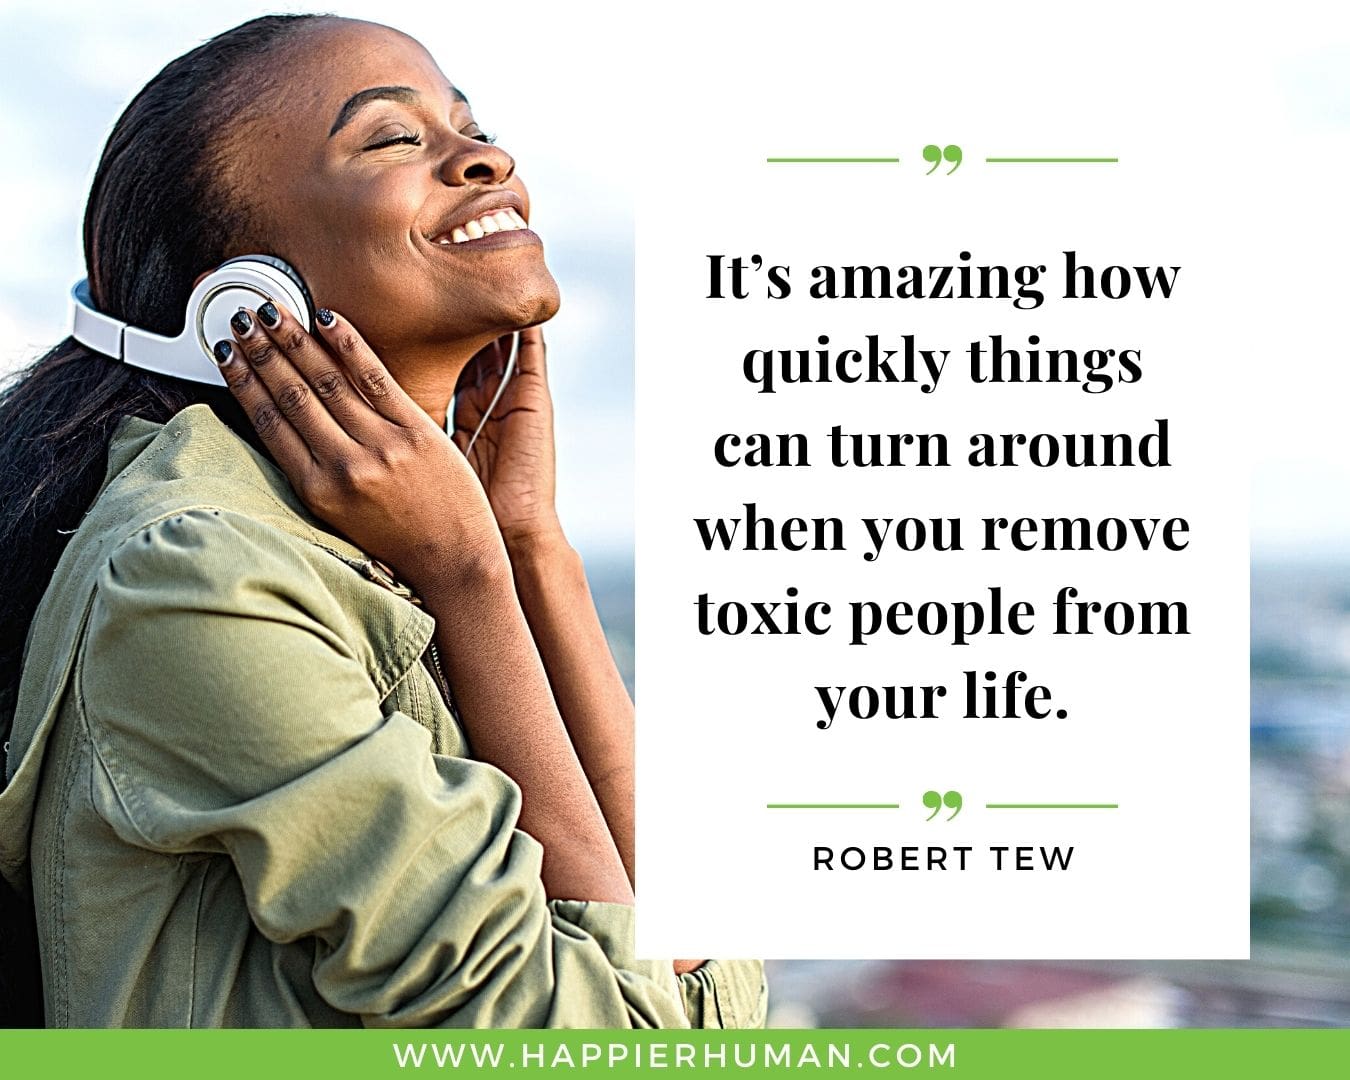 Toxic People Quotes - “It’s amazing how quickly things can turn around when you remove toxic people from your life.” – Robert Tew